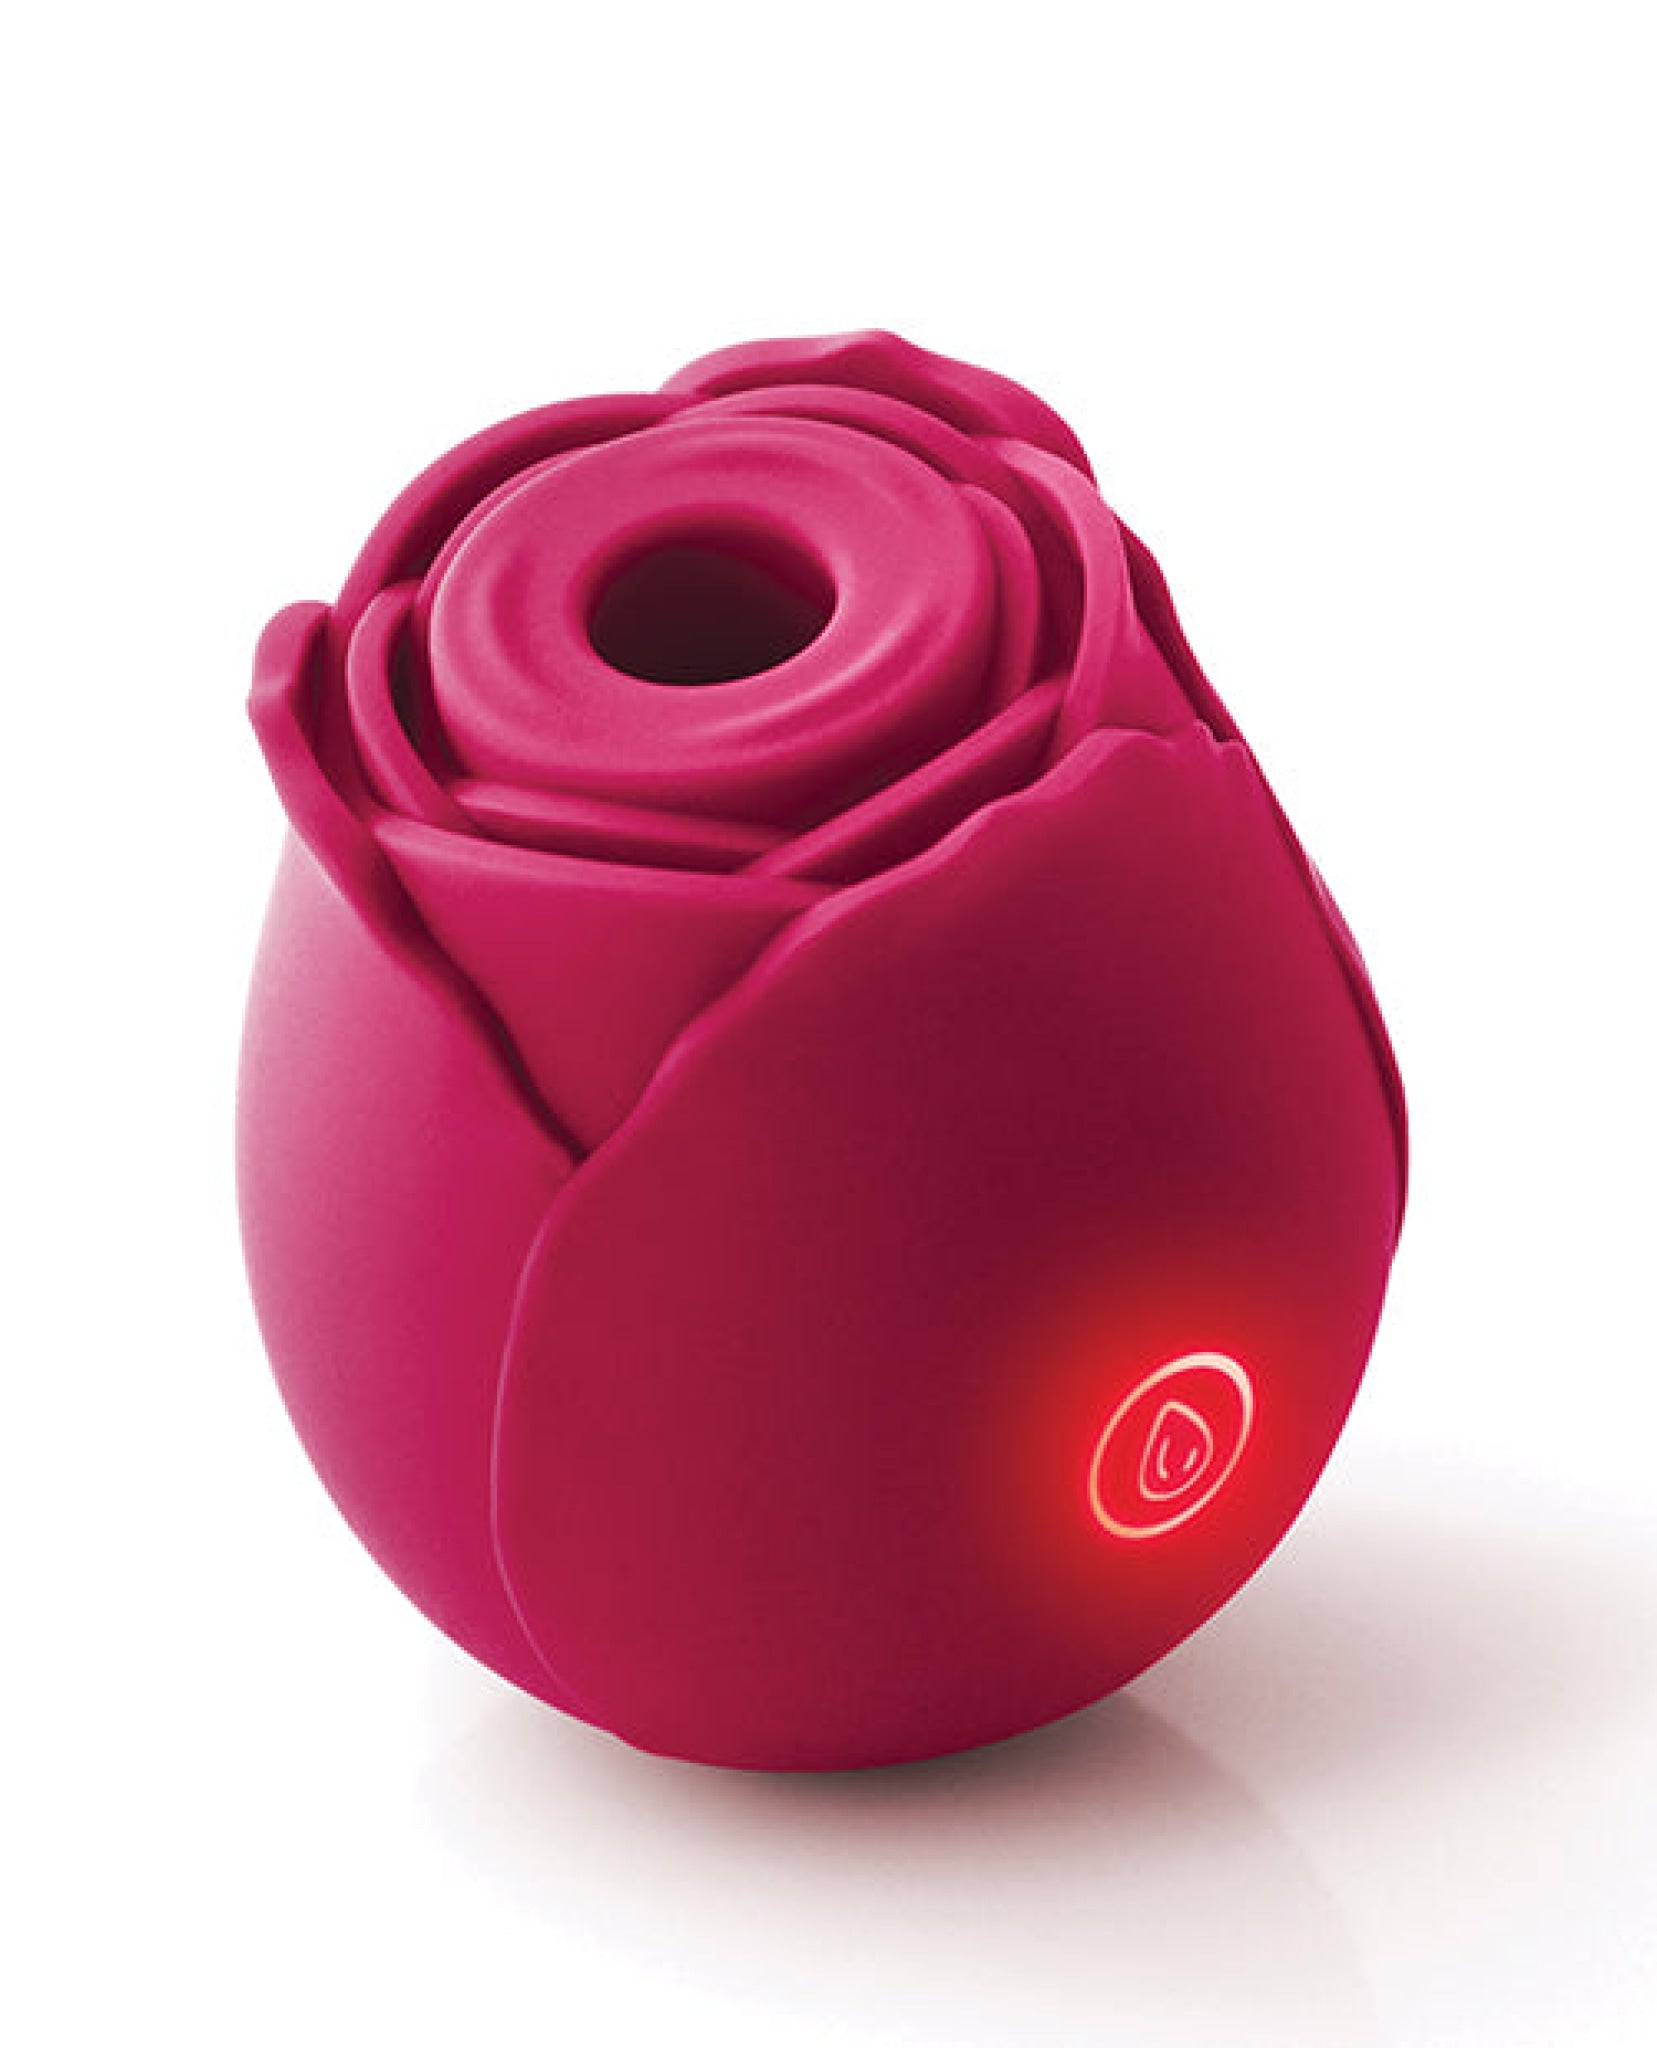 Inya The Rose Rechargeable Suction Vibe Inya